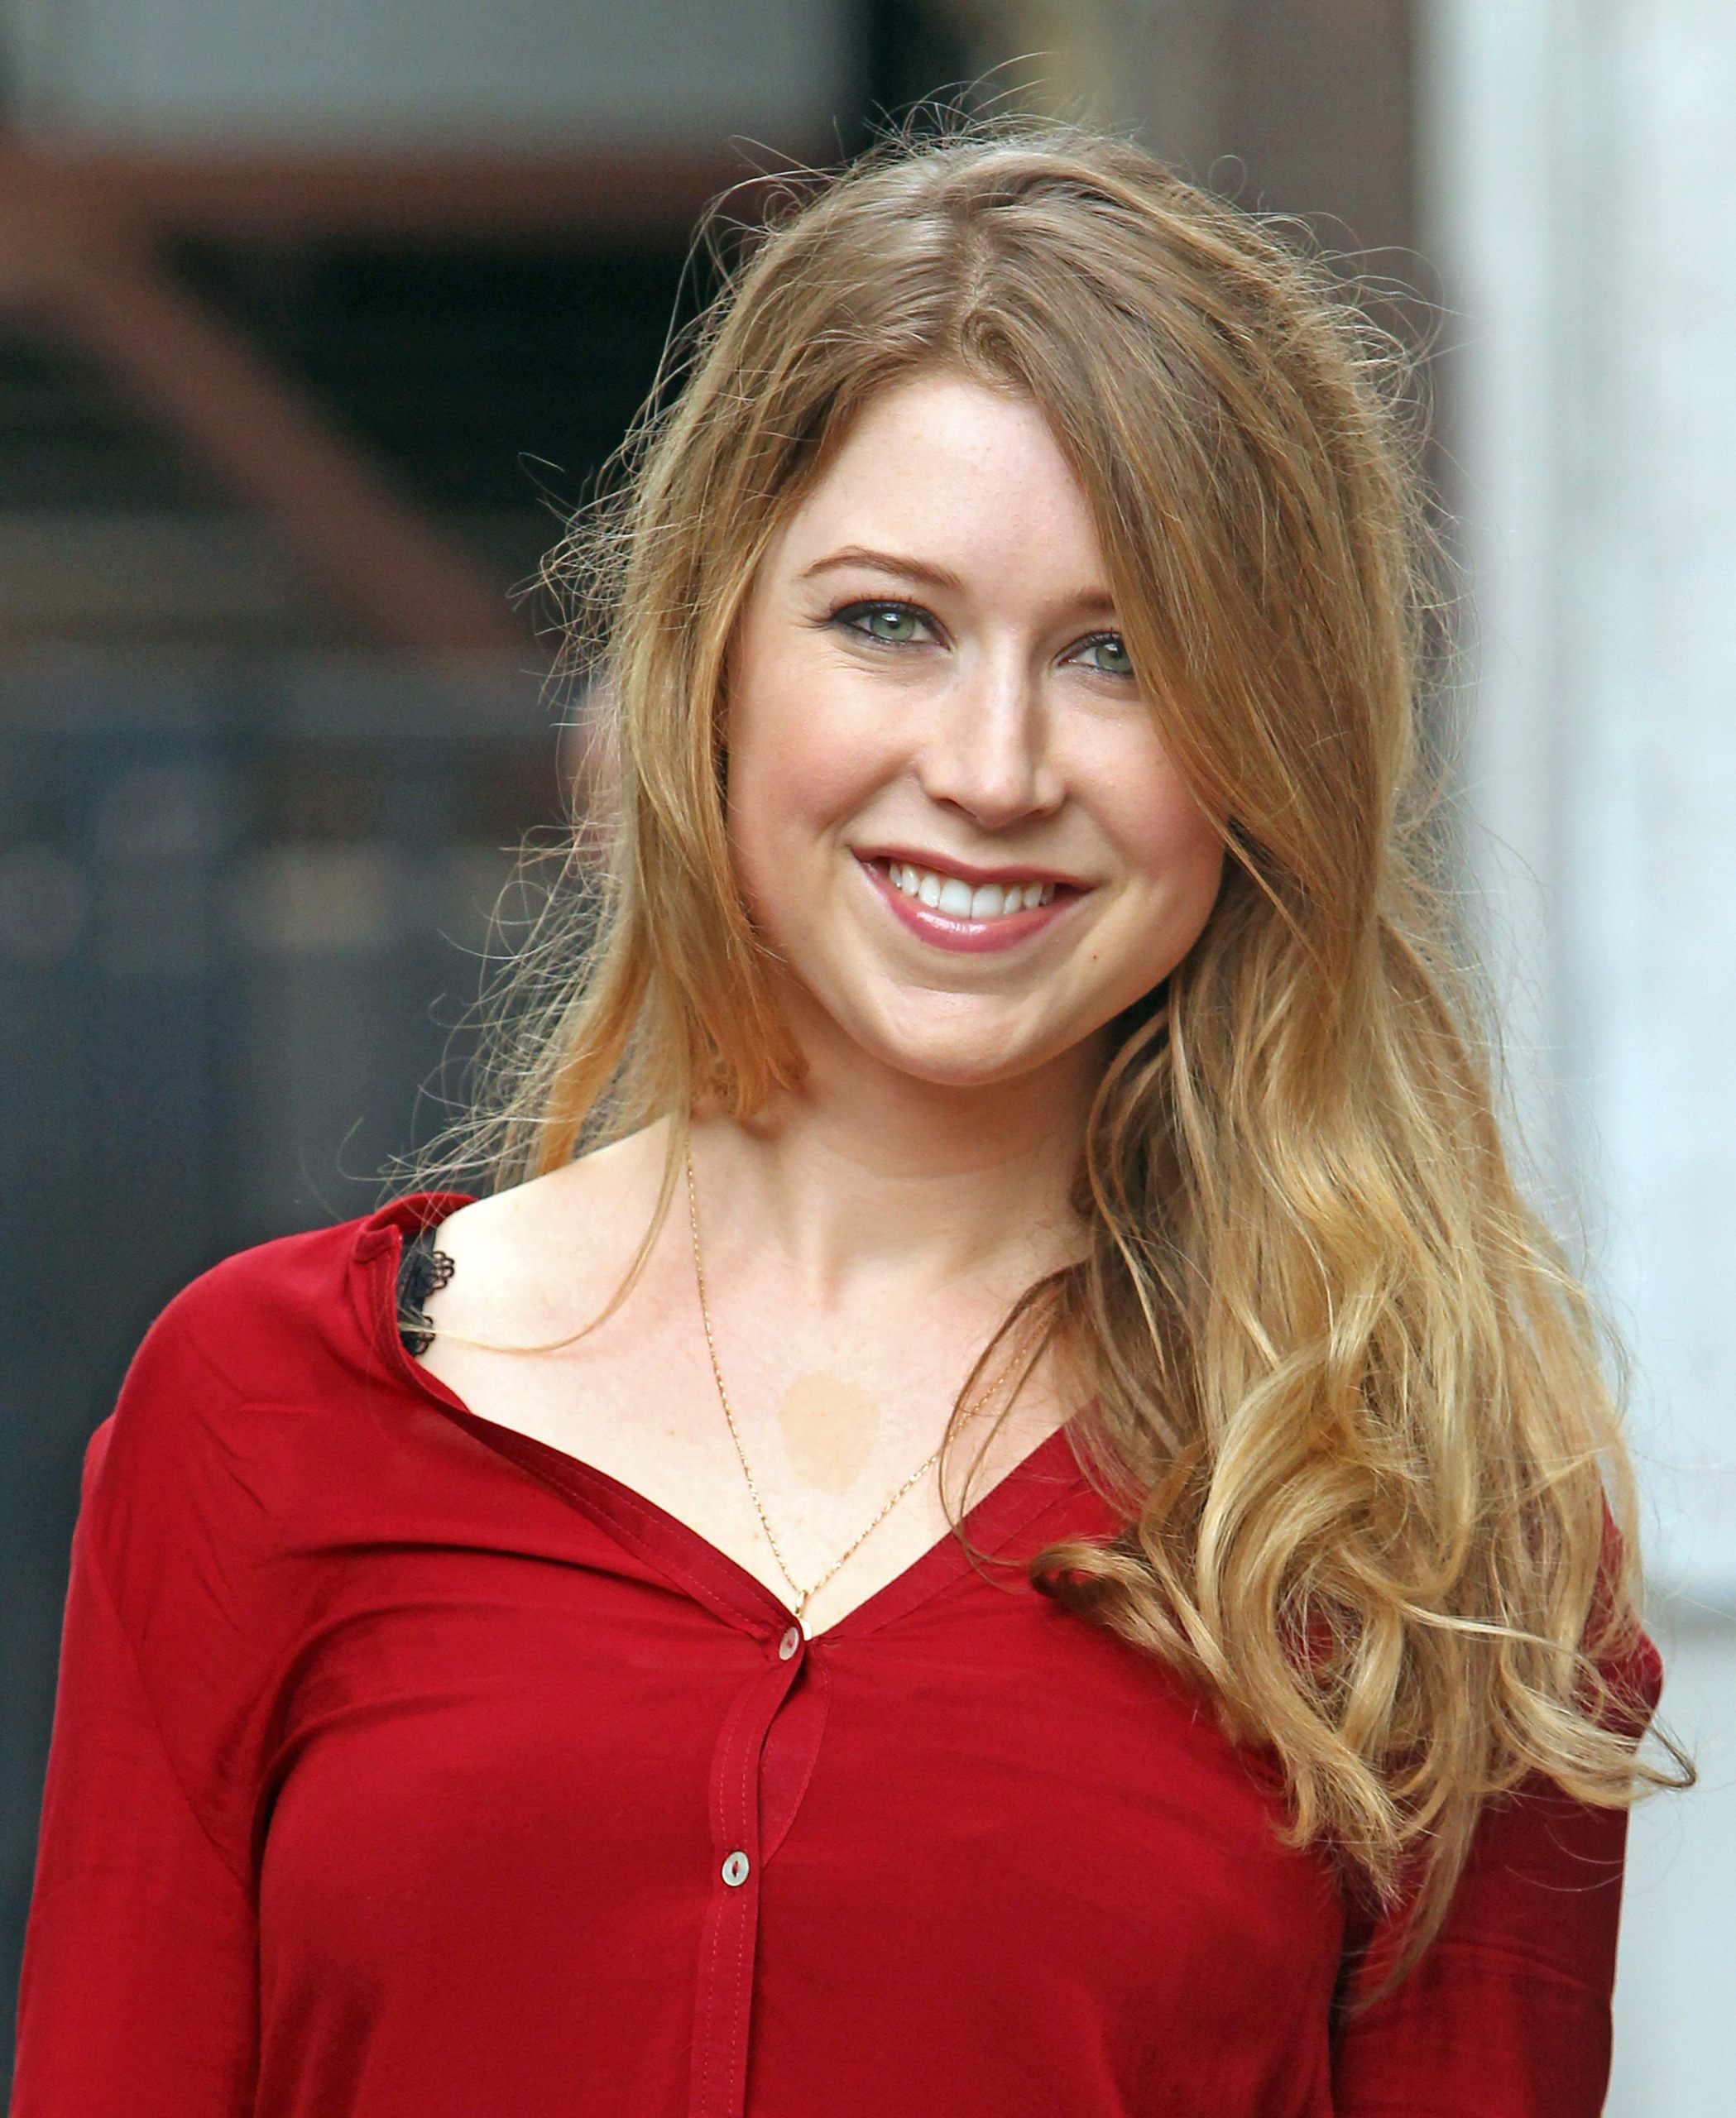 hayley westenra, images, image, wallpaper, photos, photo, photograph, galle...